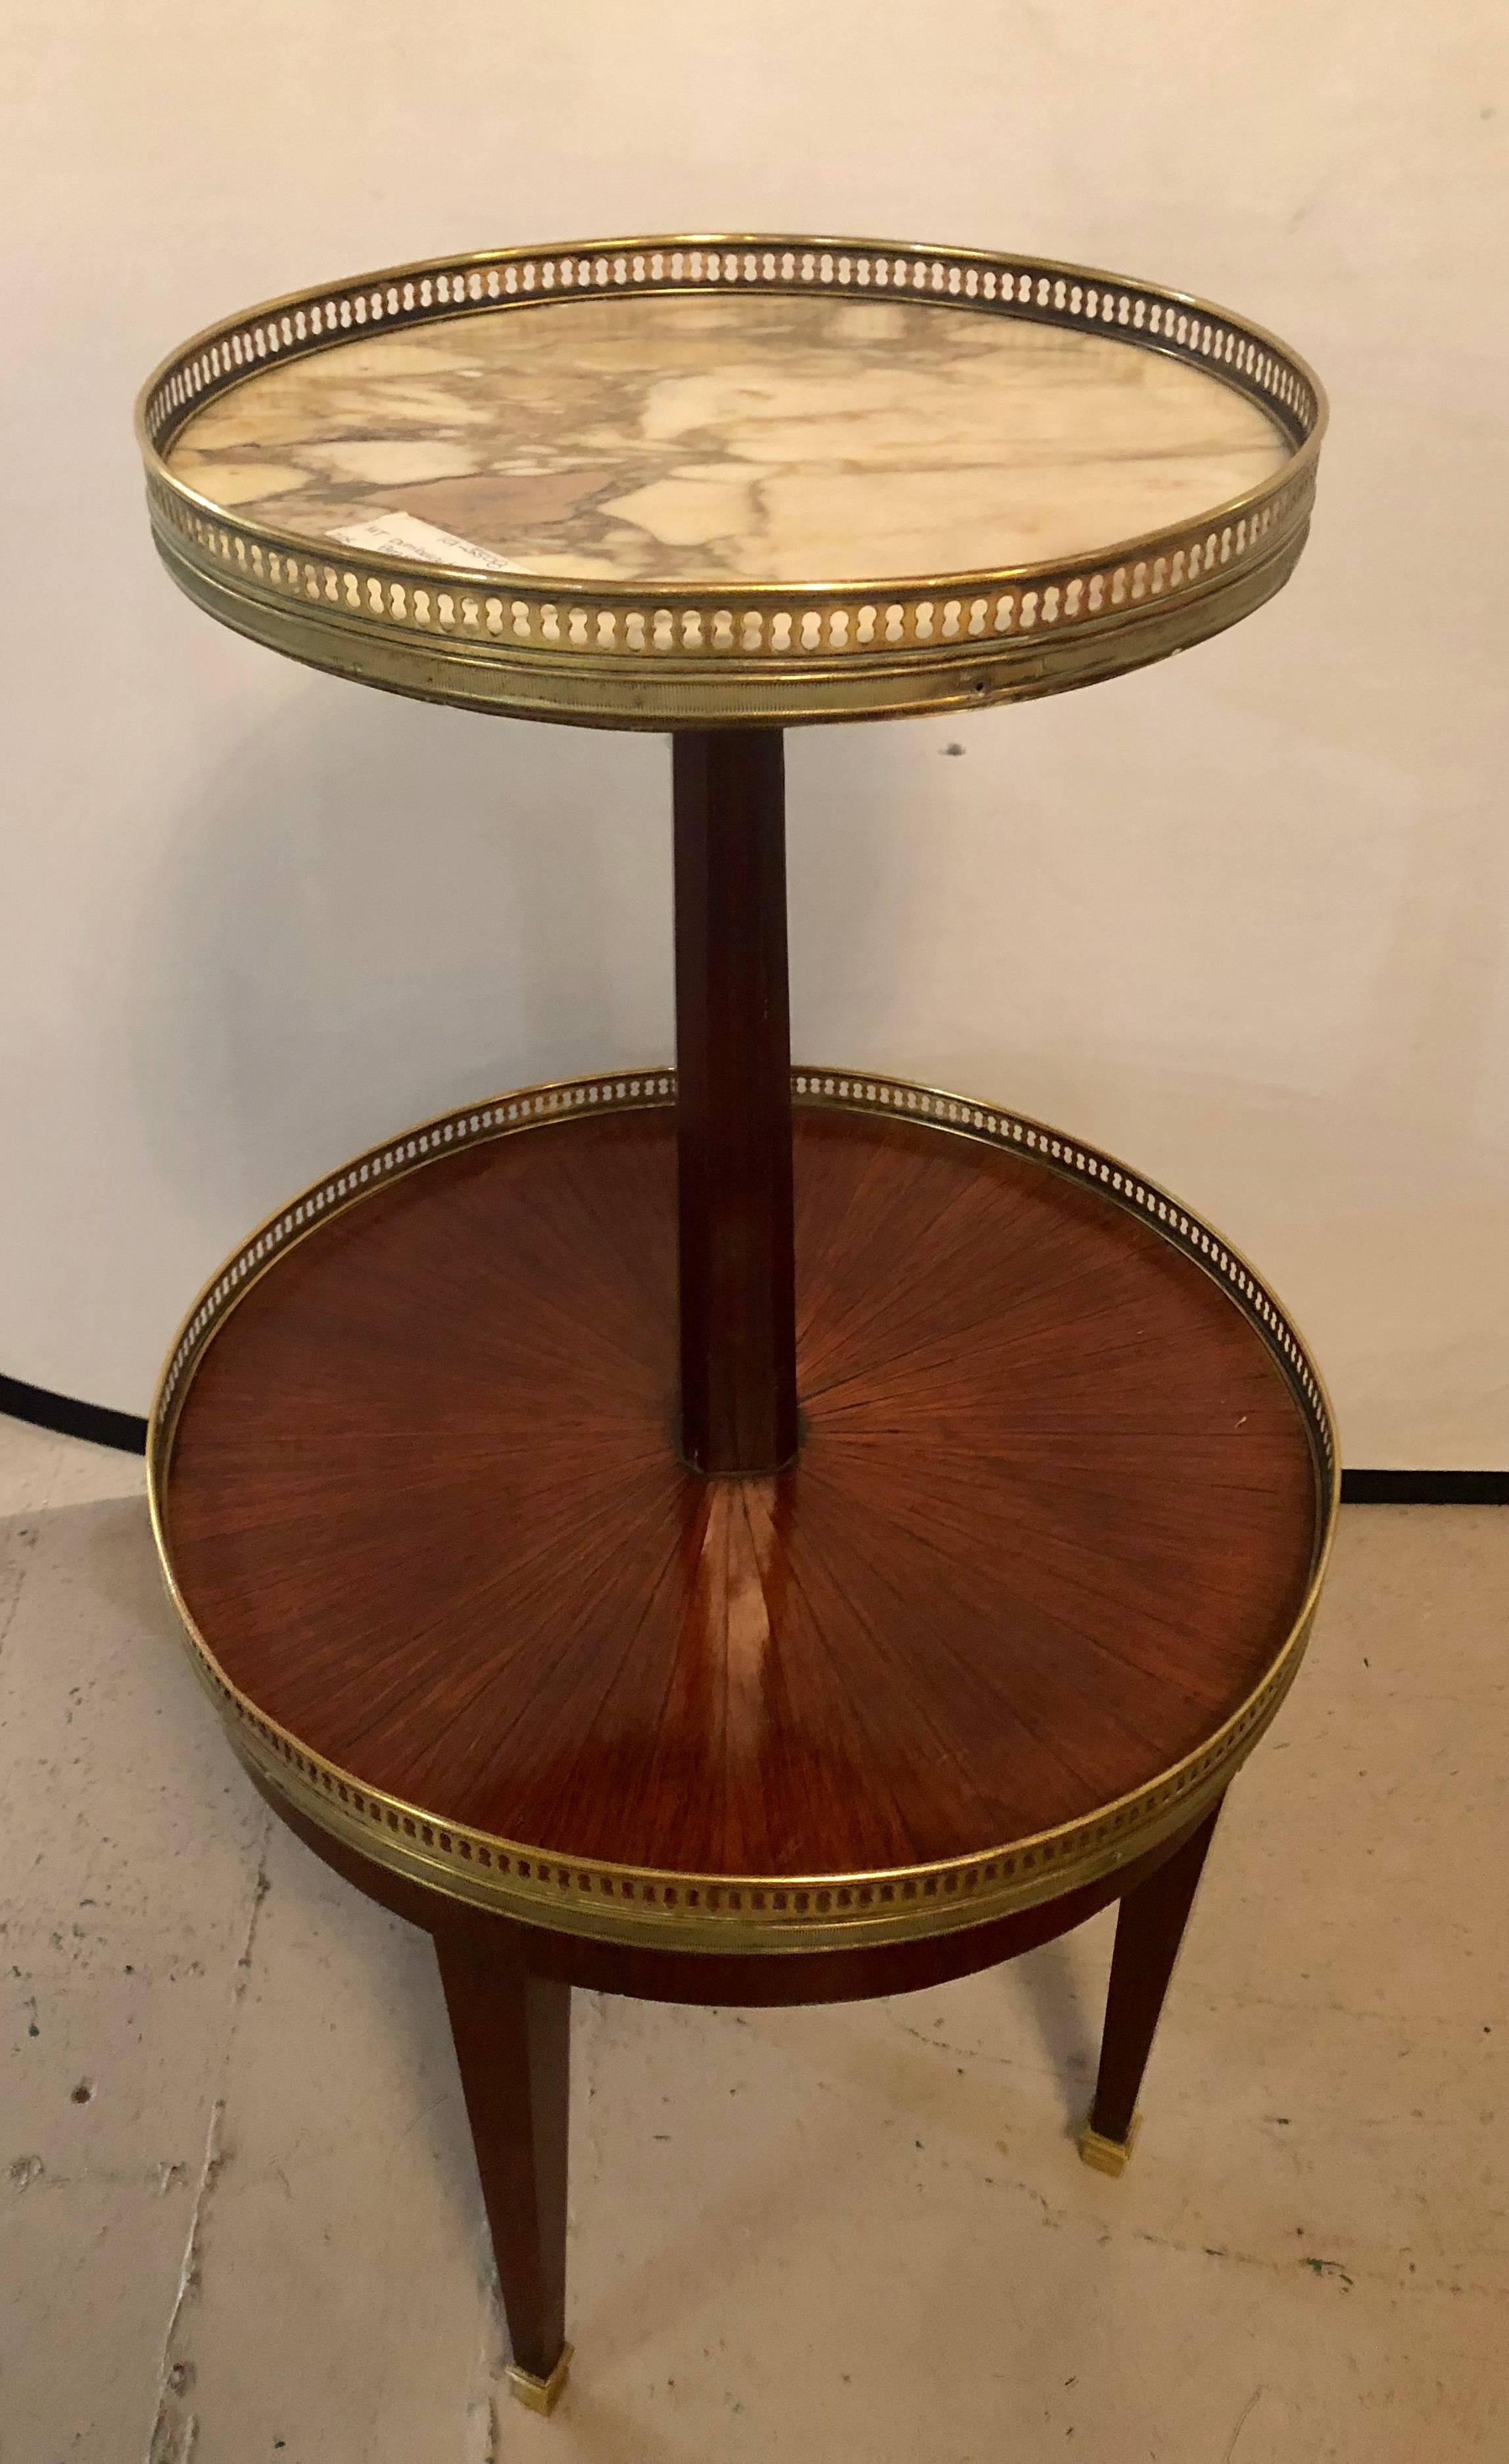 French mahogany marble top dumbwaiter / two-tier side table with brass gallery. Custom quality with pieced bronze galleried shelves.